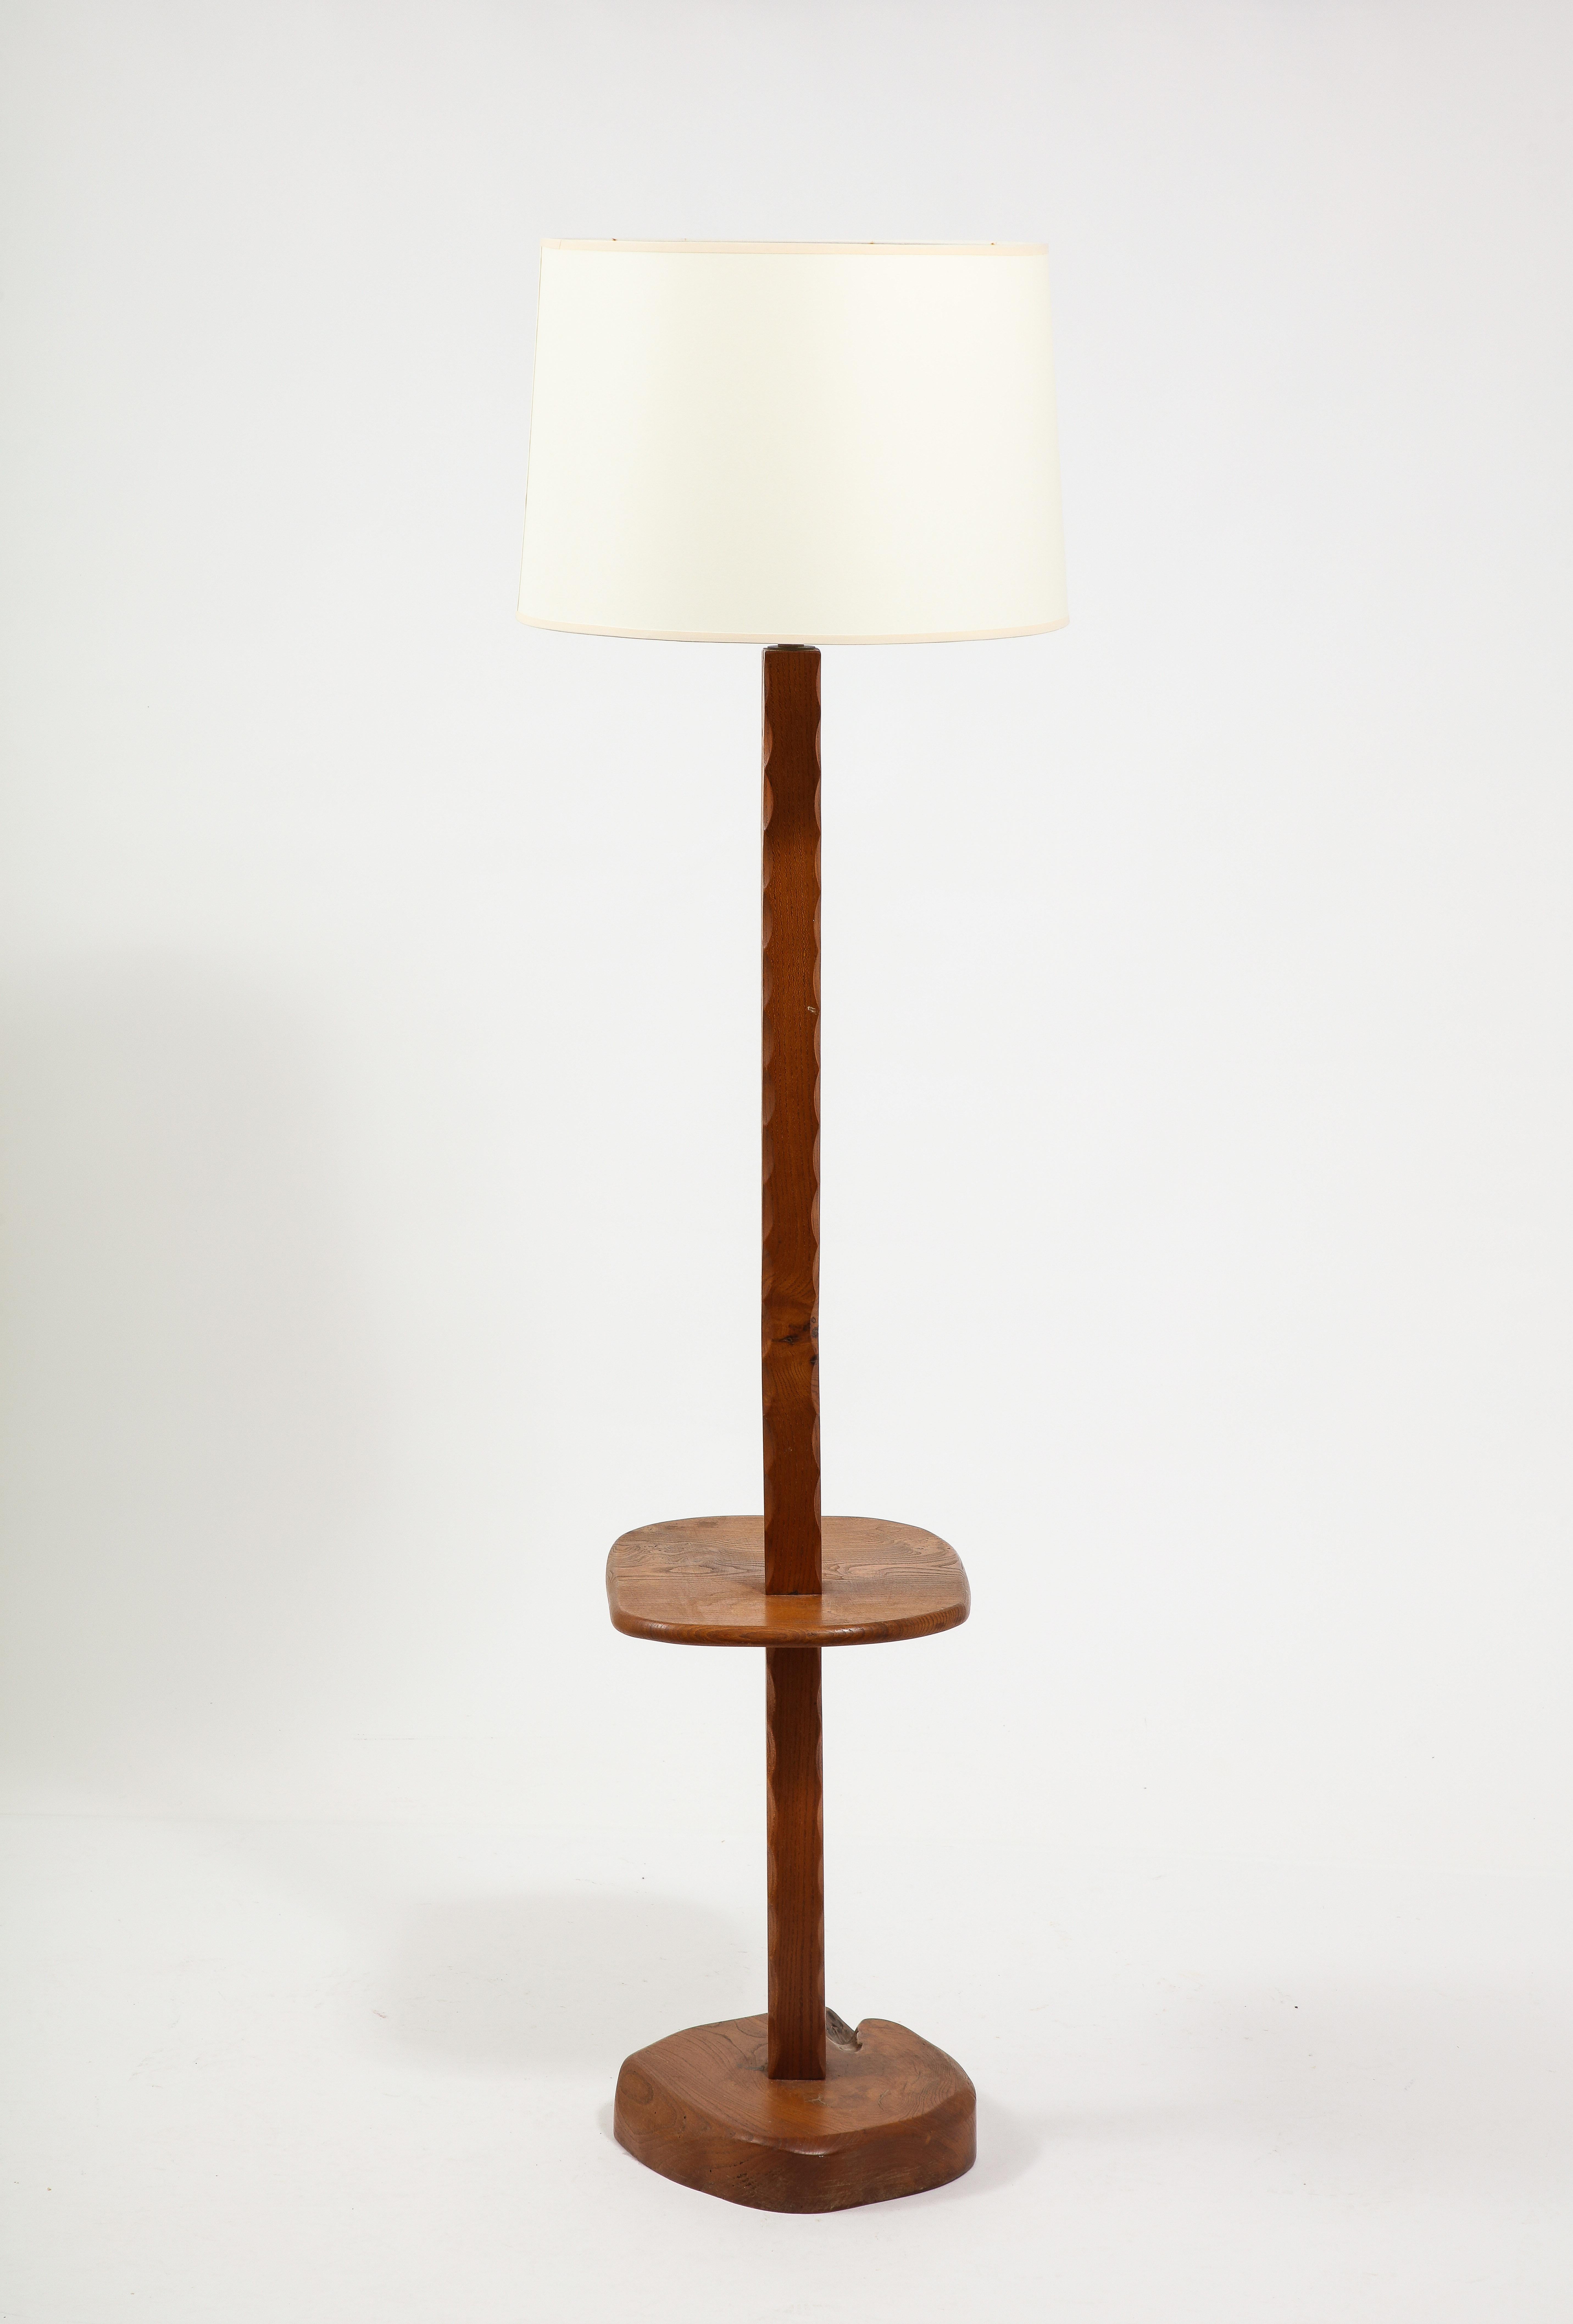 Solid Elm Floor Lamp With Shelf, France 1950's For Sale 4